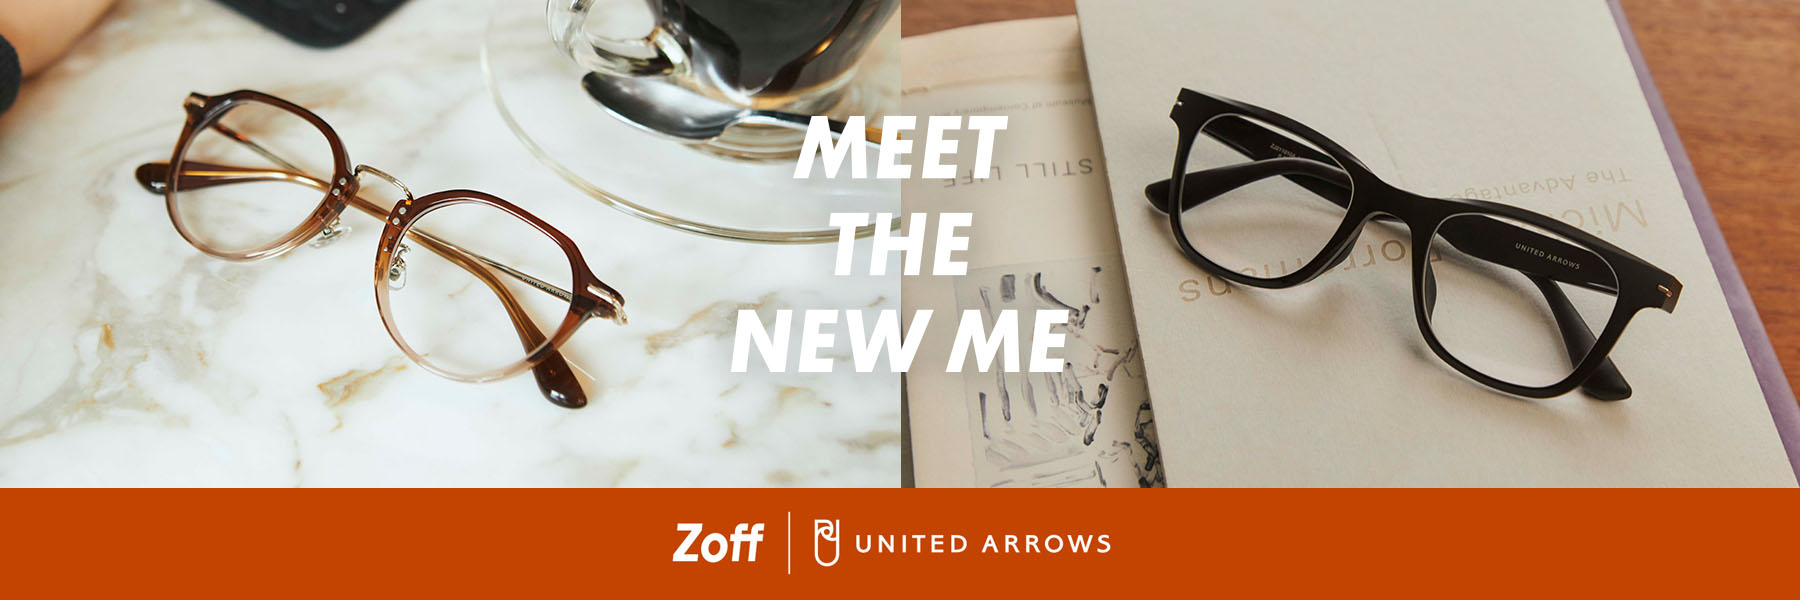 Zoff UNITED ARROWS MEET THE NEW ME